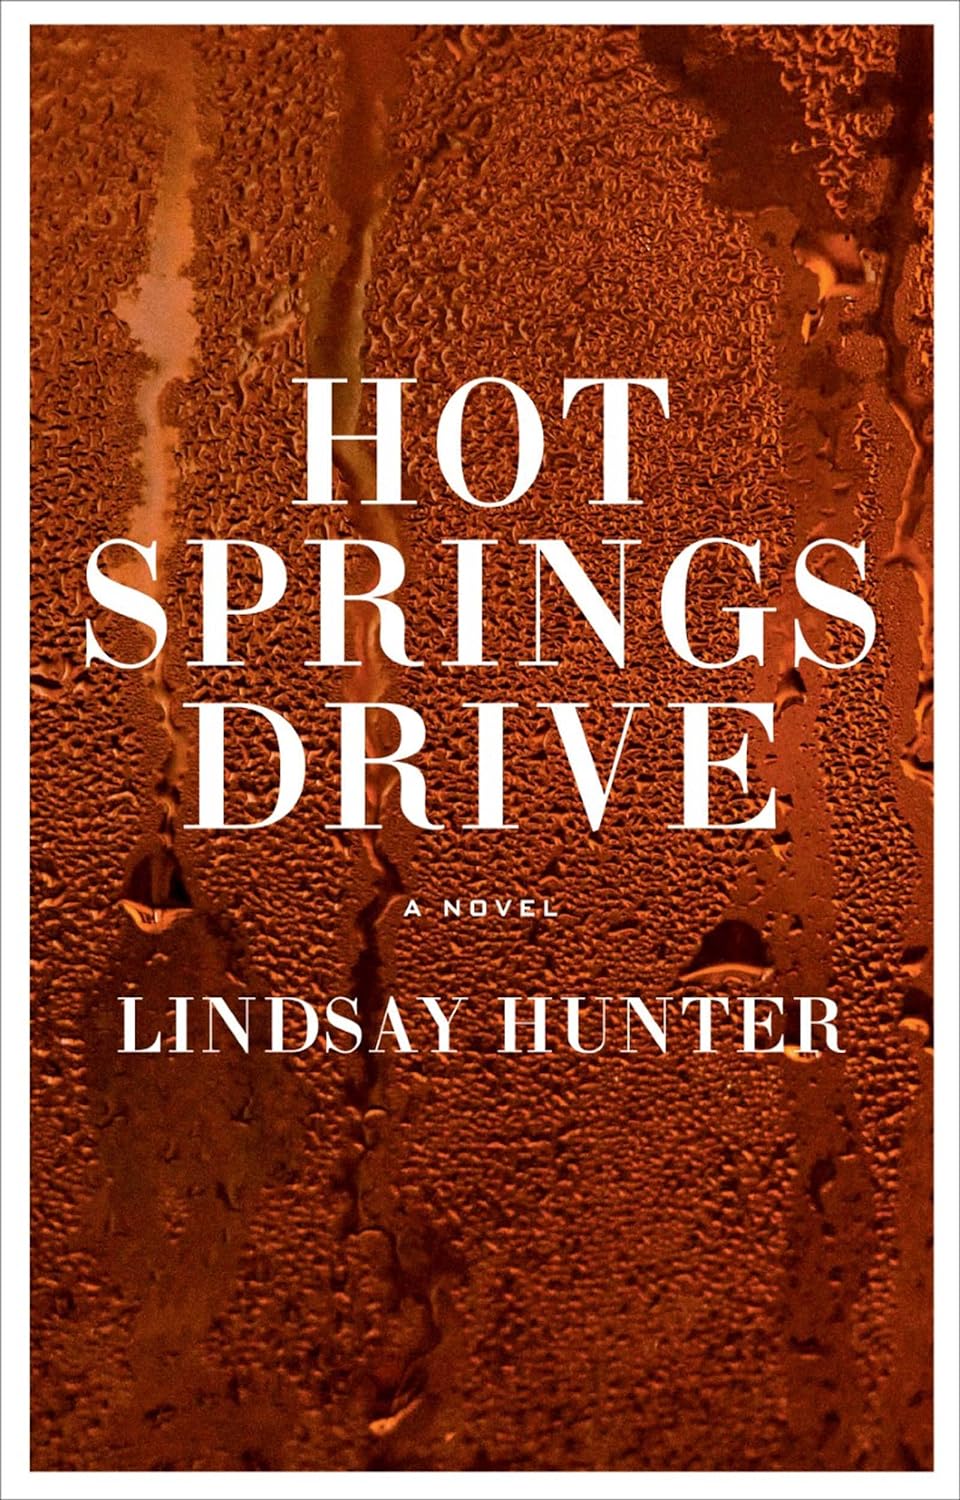 Hot Springs Drive - by Lindsay Hunter (Hardcover)